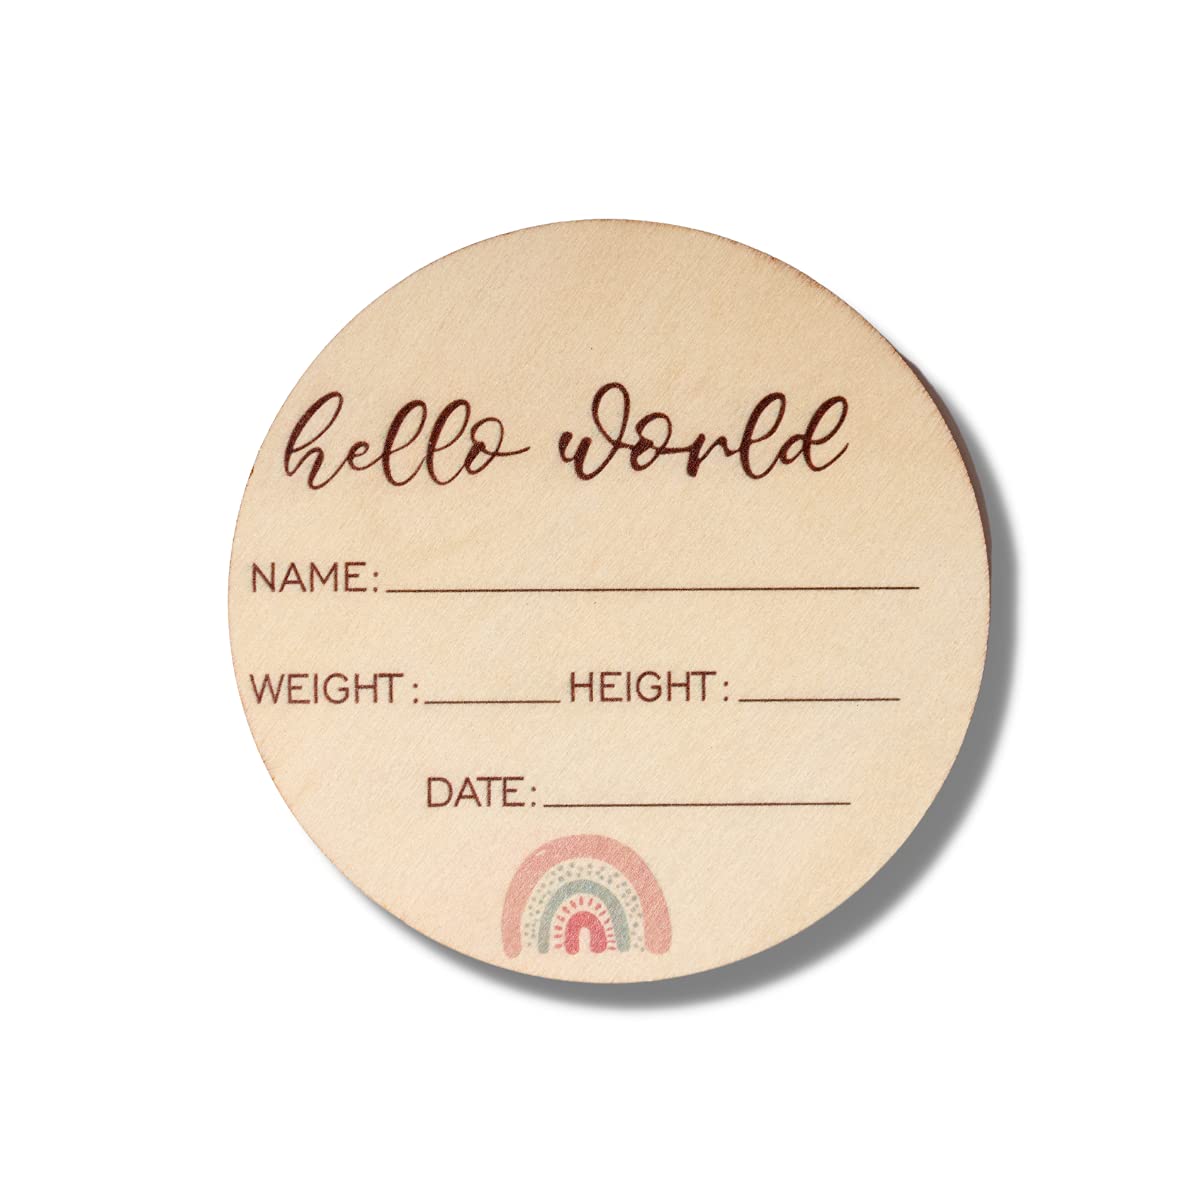 Birth Announcement Sign - Hello World Newborn Sign - Celebrate The Arrival of Your Baby with This Baby Annoucement Sign - Record Birth Details on This Round Wooden Disc - Baby Name Announcement Sign